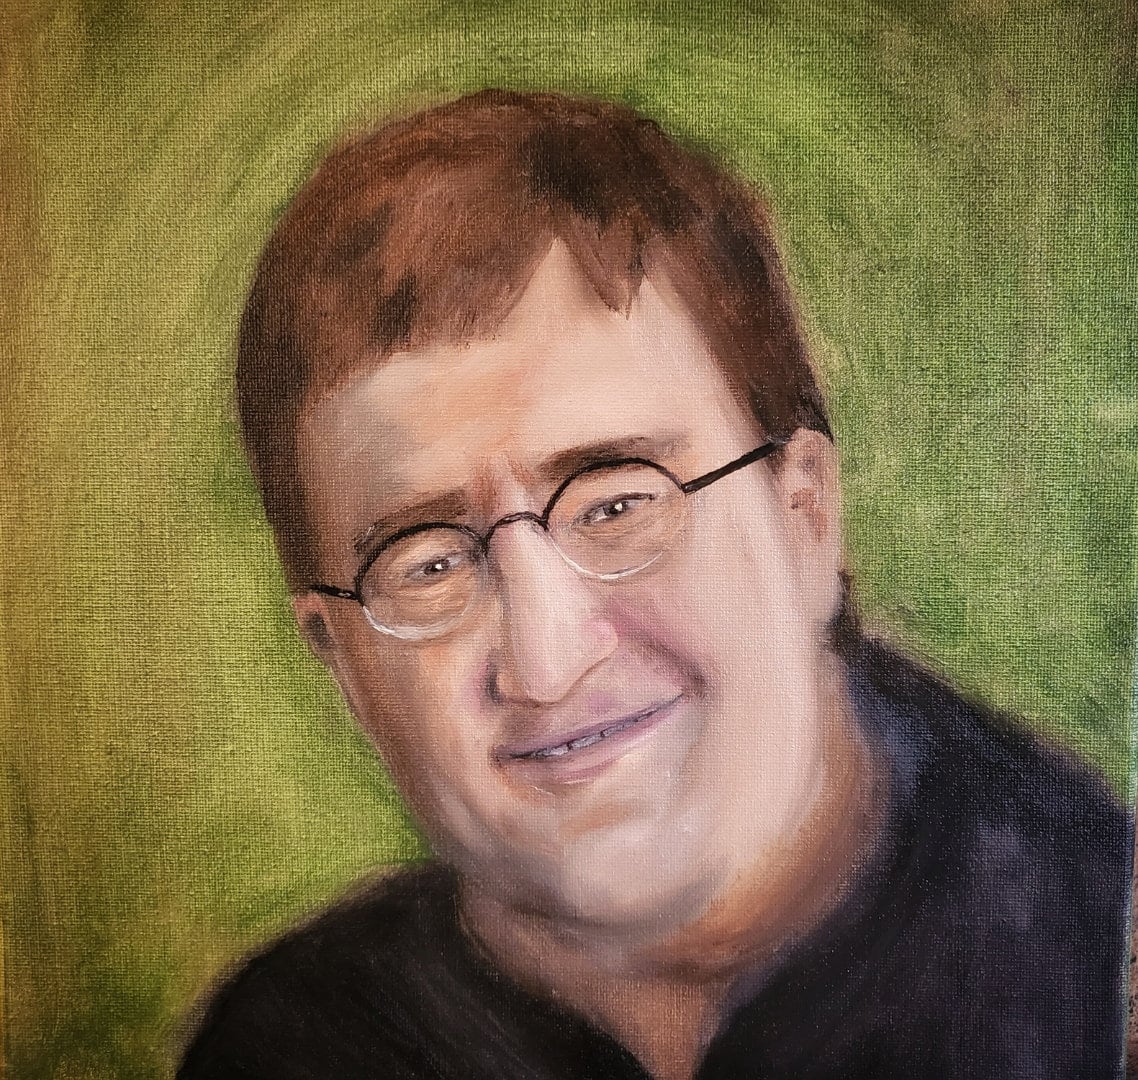 Welcoming Gaben (and his underbelly) to the International, Gabe Newell